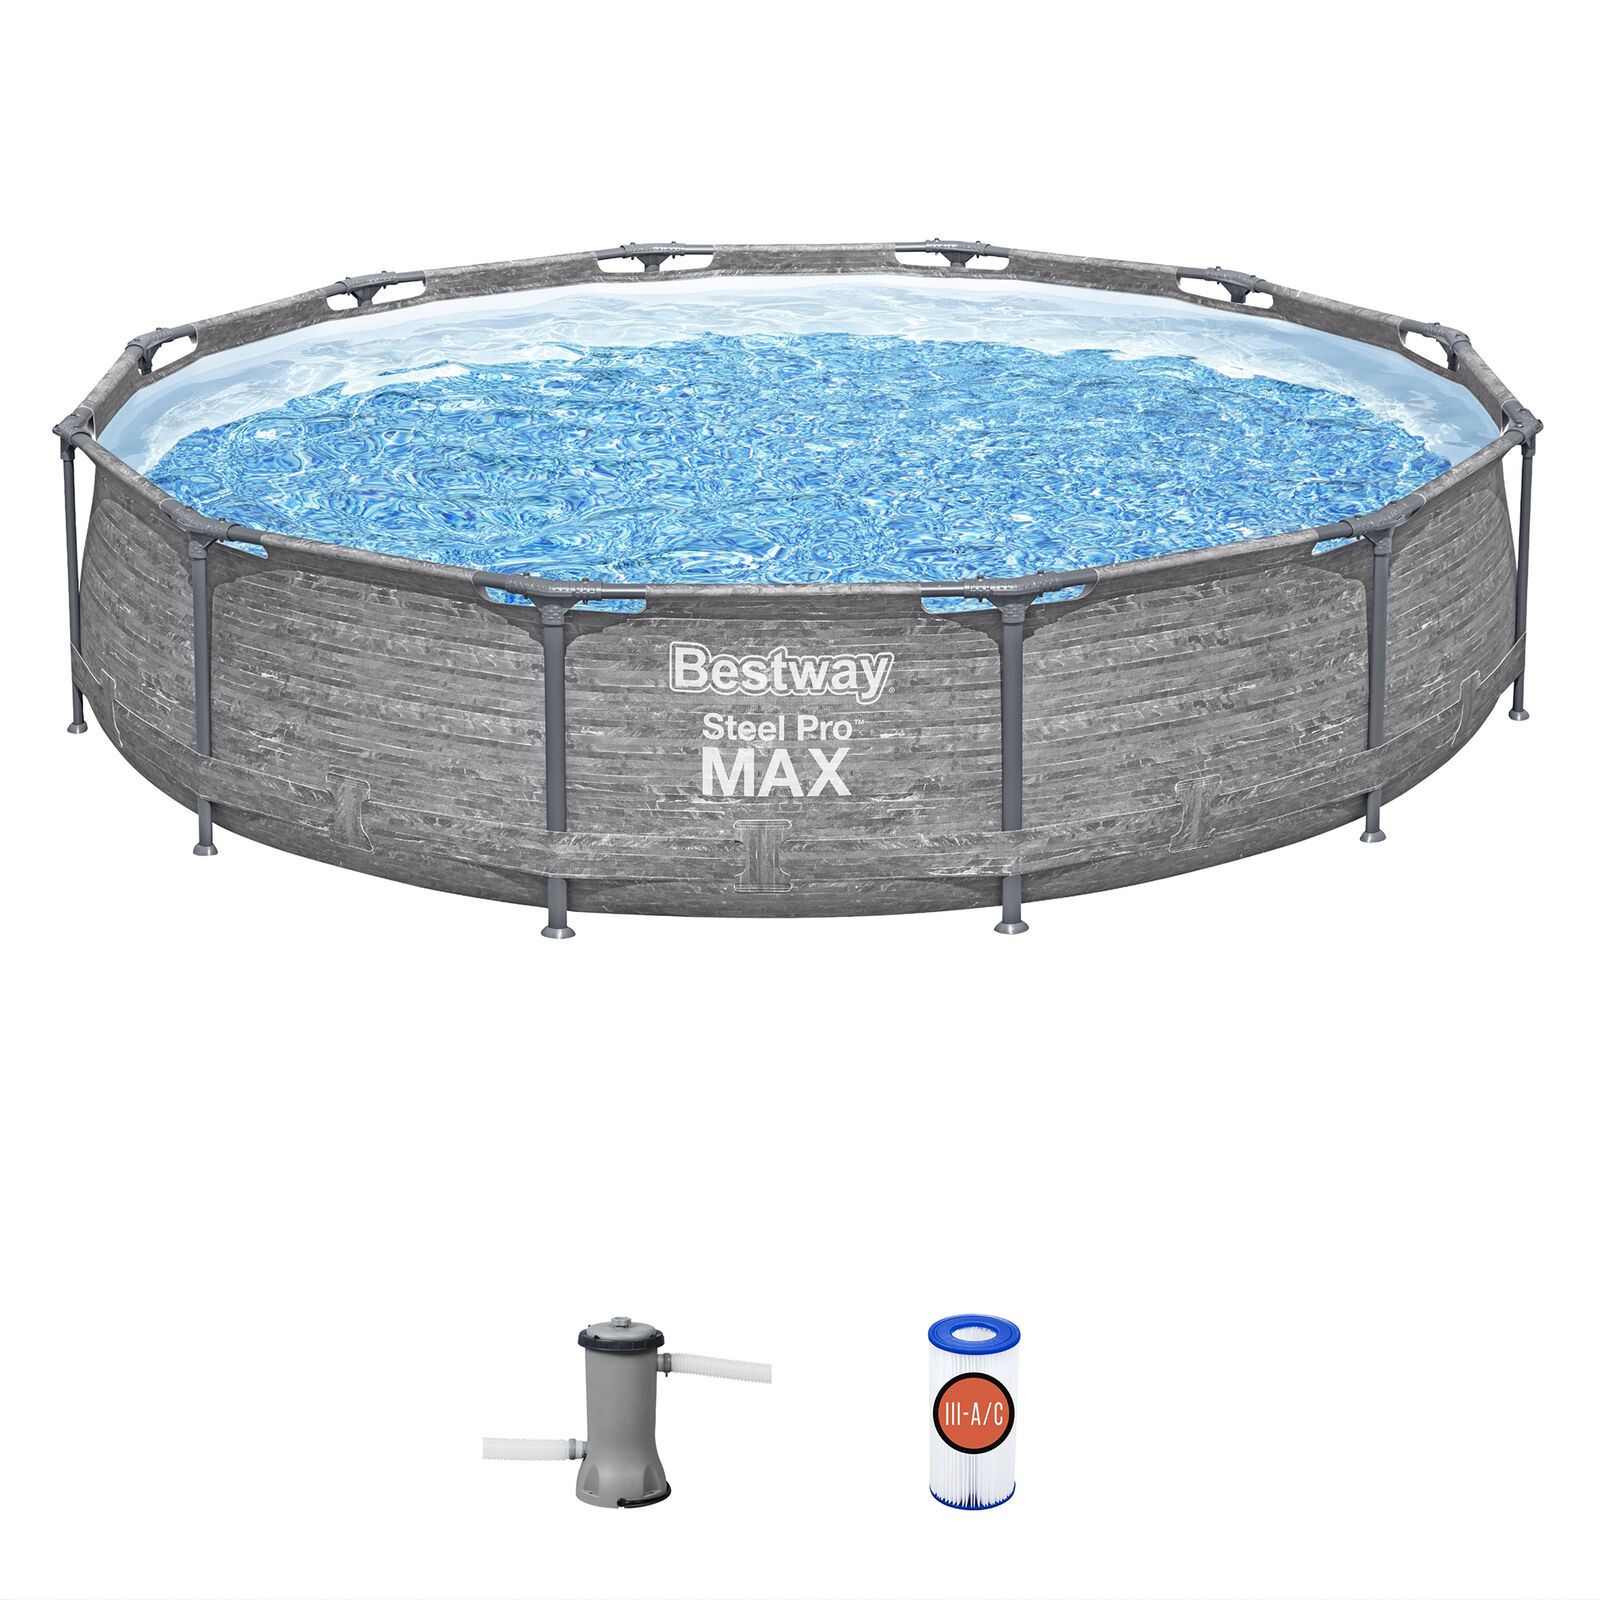 Bestway Steel Pro MAX 12' x 30" Above Ground Outdoor Swimming Pool Set Gray